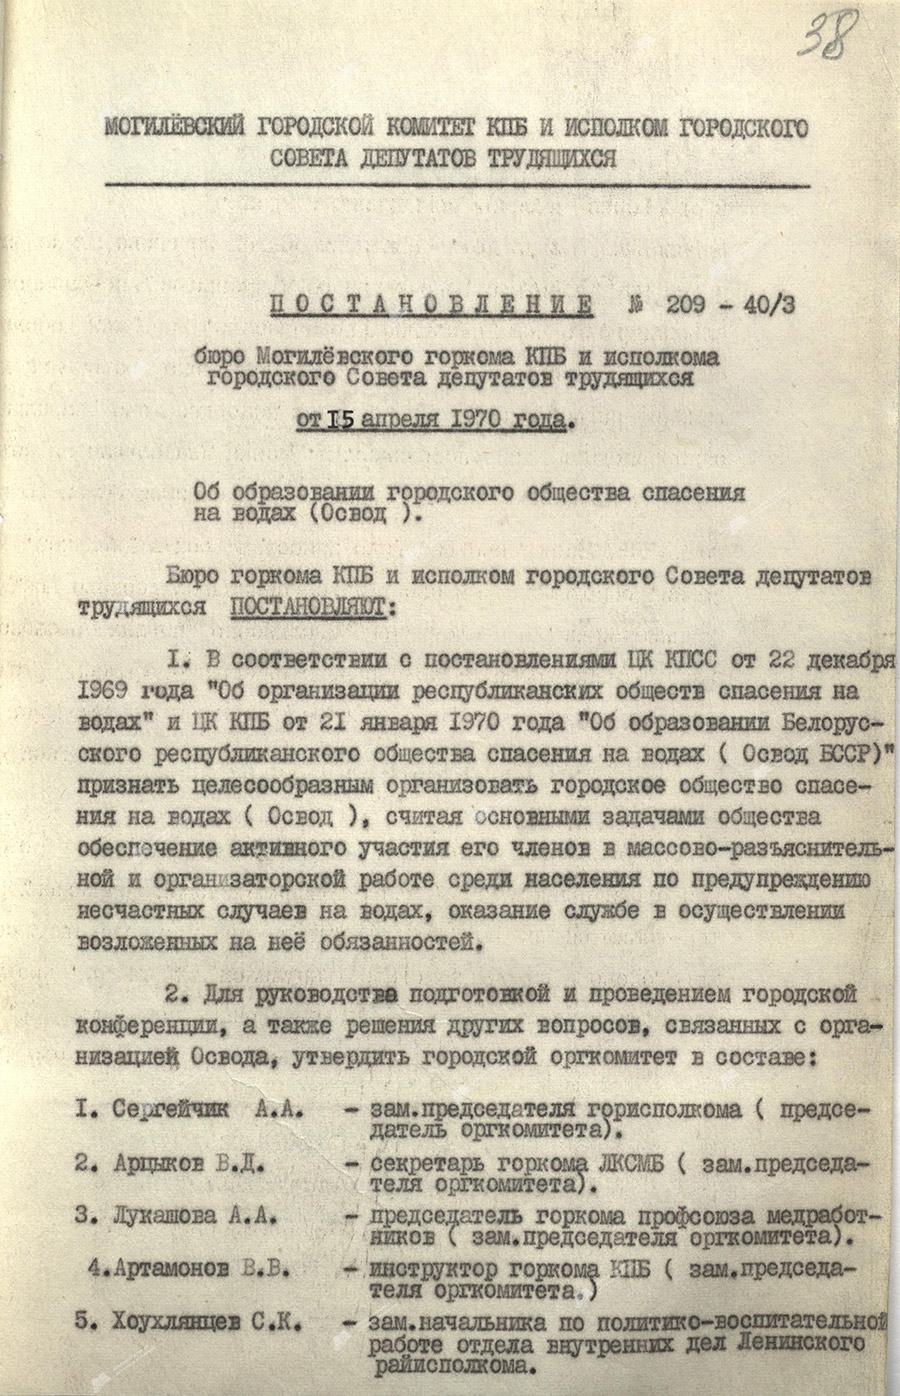 Resolution No. 209-40/3 of the Bureau of the City Committee of the Communist Party (Bolsheviks) of Belarus and the Executive Committee of the Mogilev City Council of Workers’ Deputies on the organization of the Mogilev City Water Rescue Society-с. 0